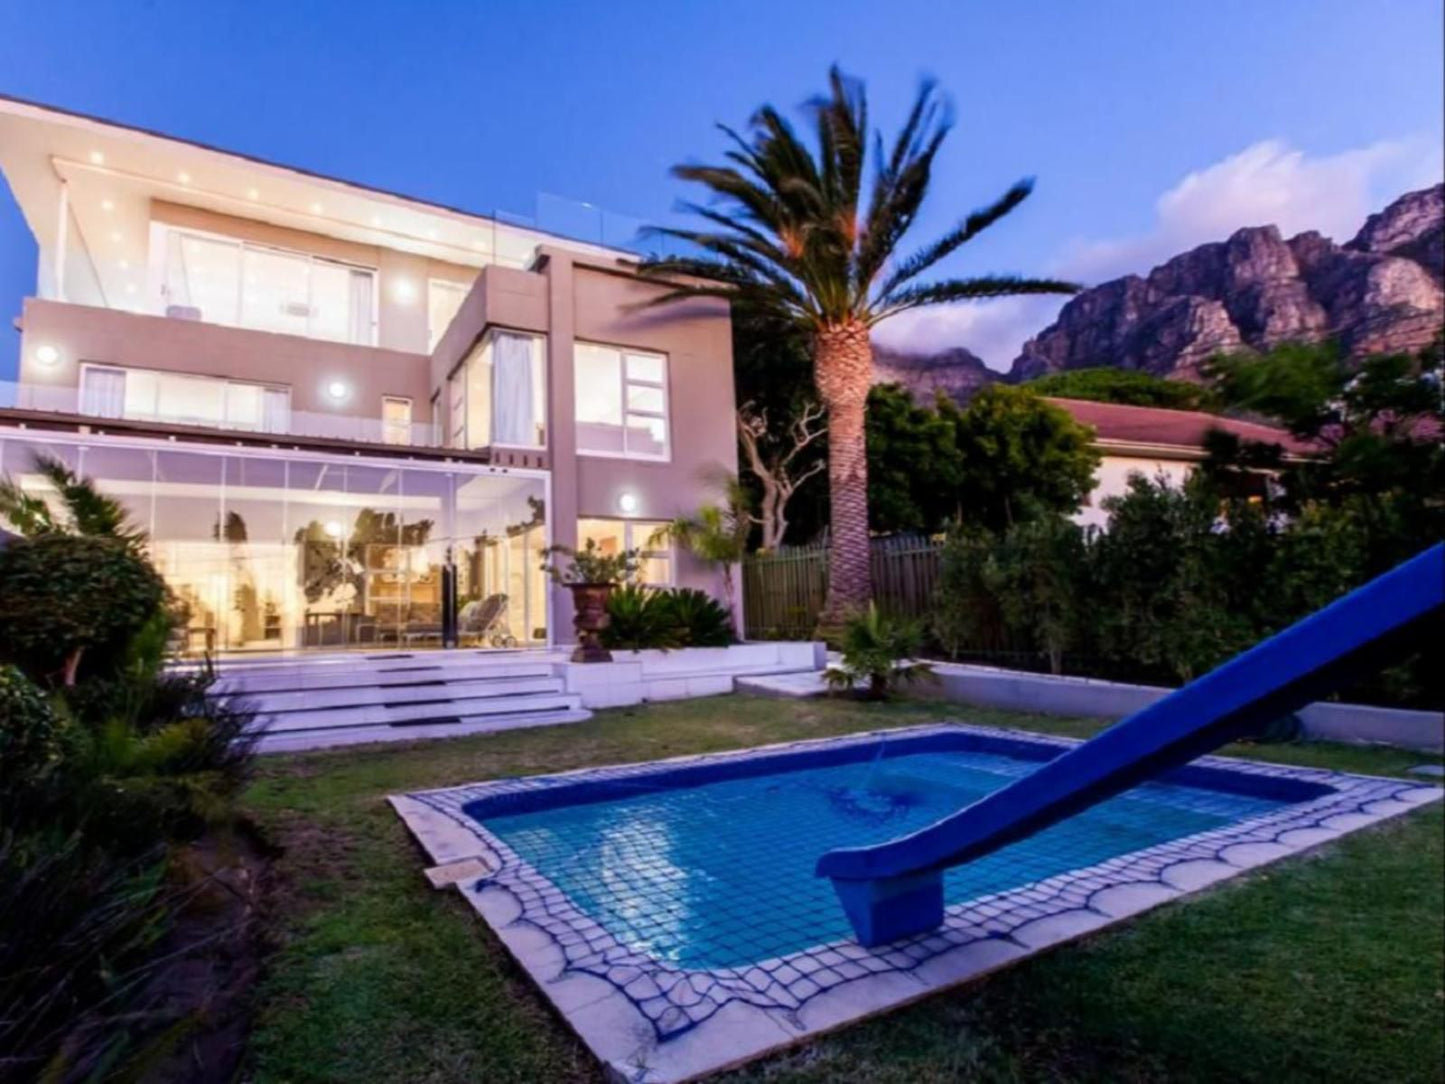 Villa On 1St Crescent Camps Bay Cape Town Western Cape South Africa Palm Tree, Plant, Nature, Wood, Swimming Pool